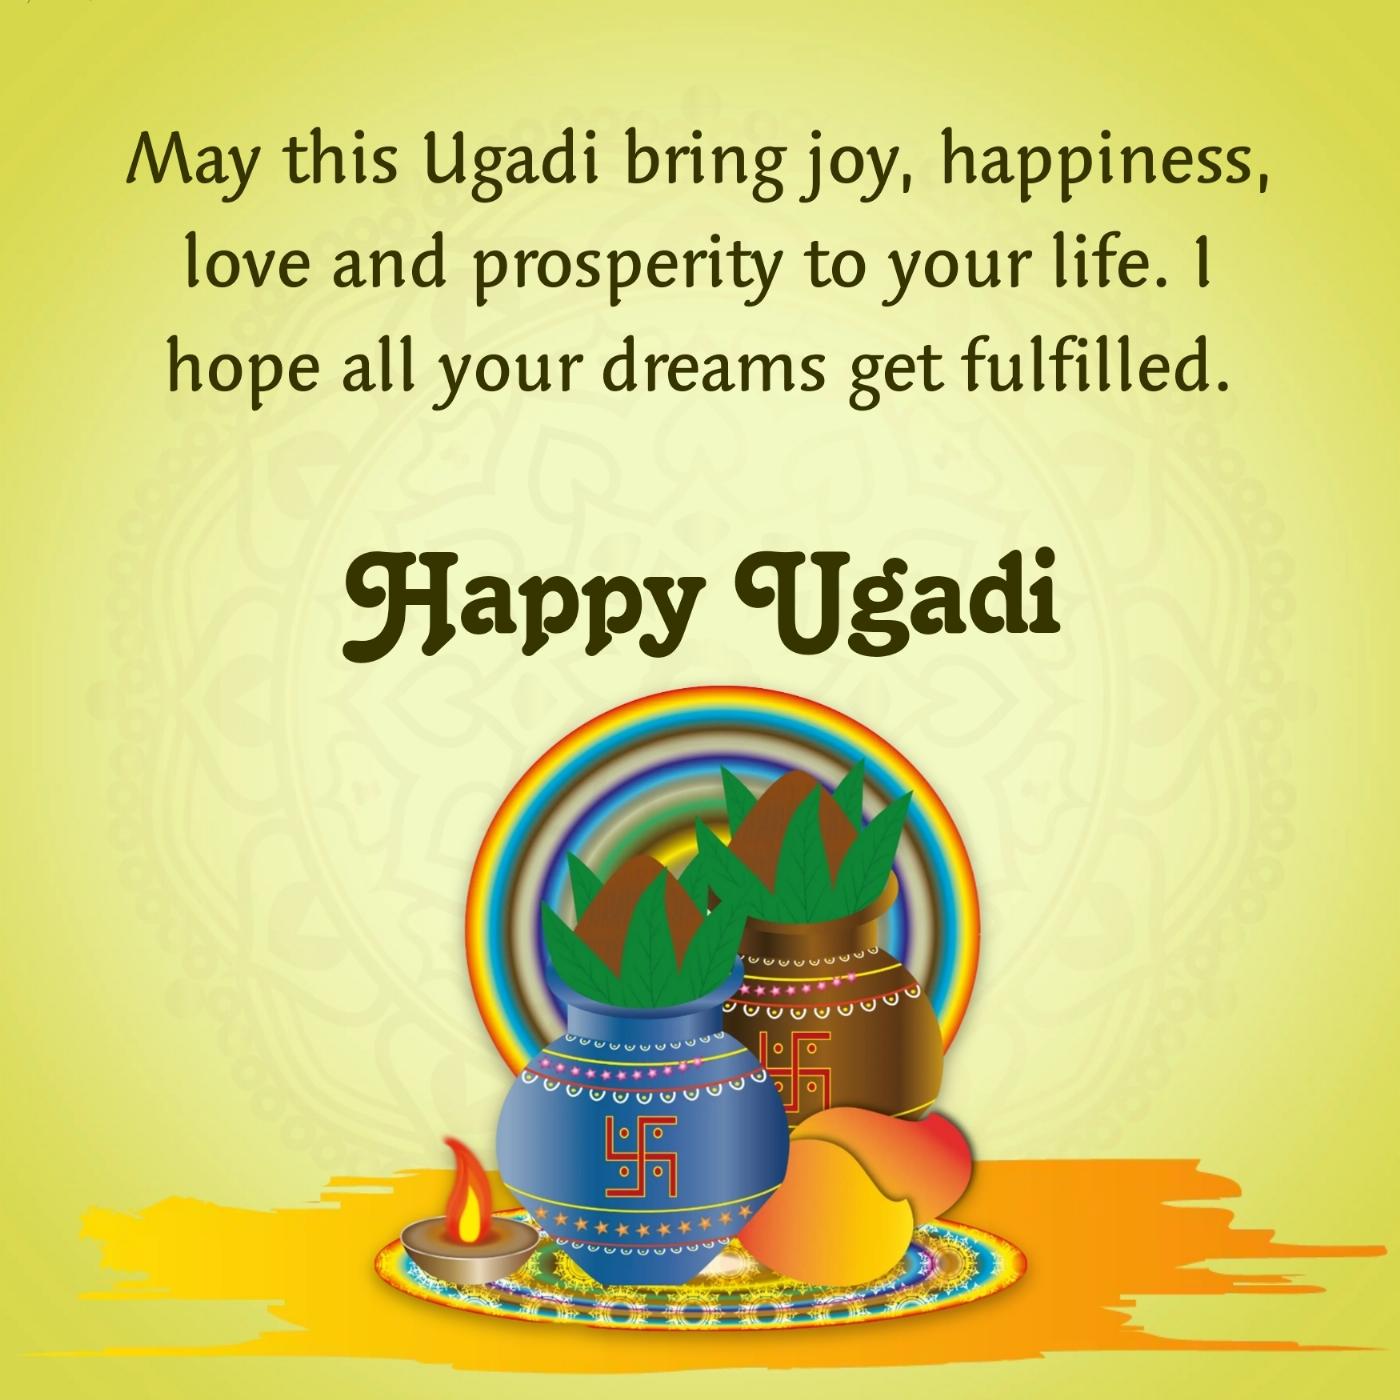 May this Ugadi bring joy happiness love and prosperity to your life